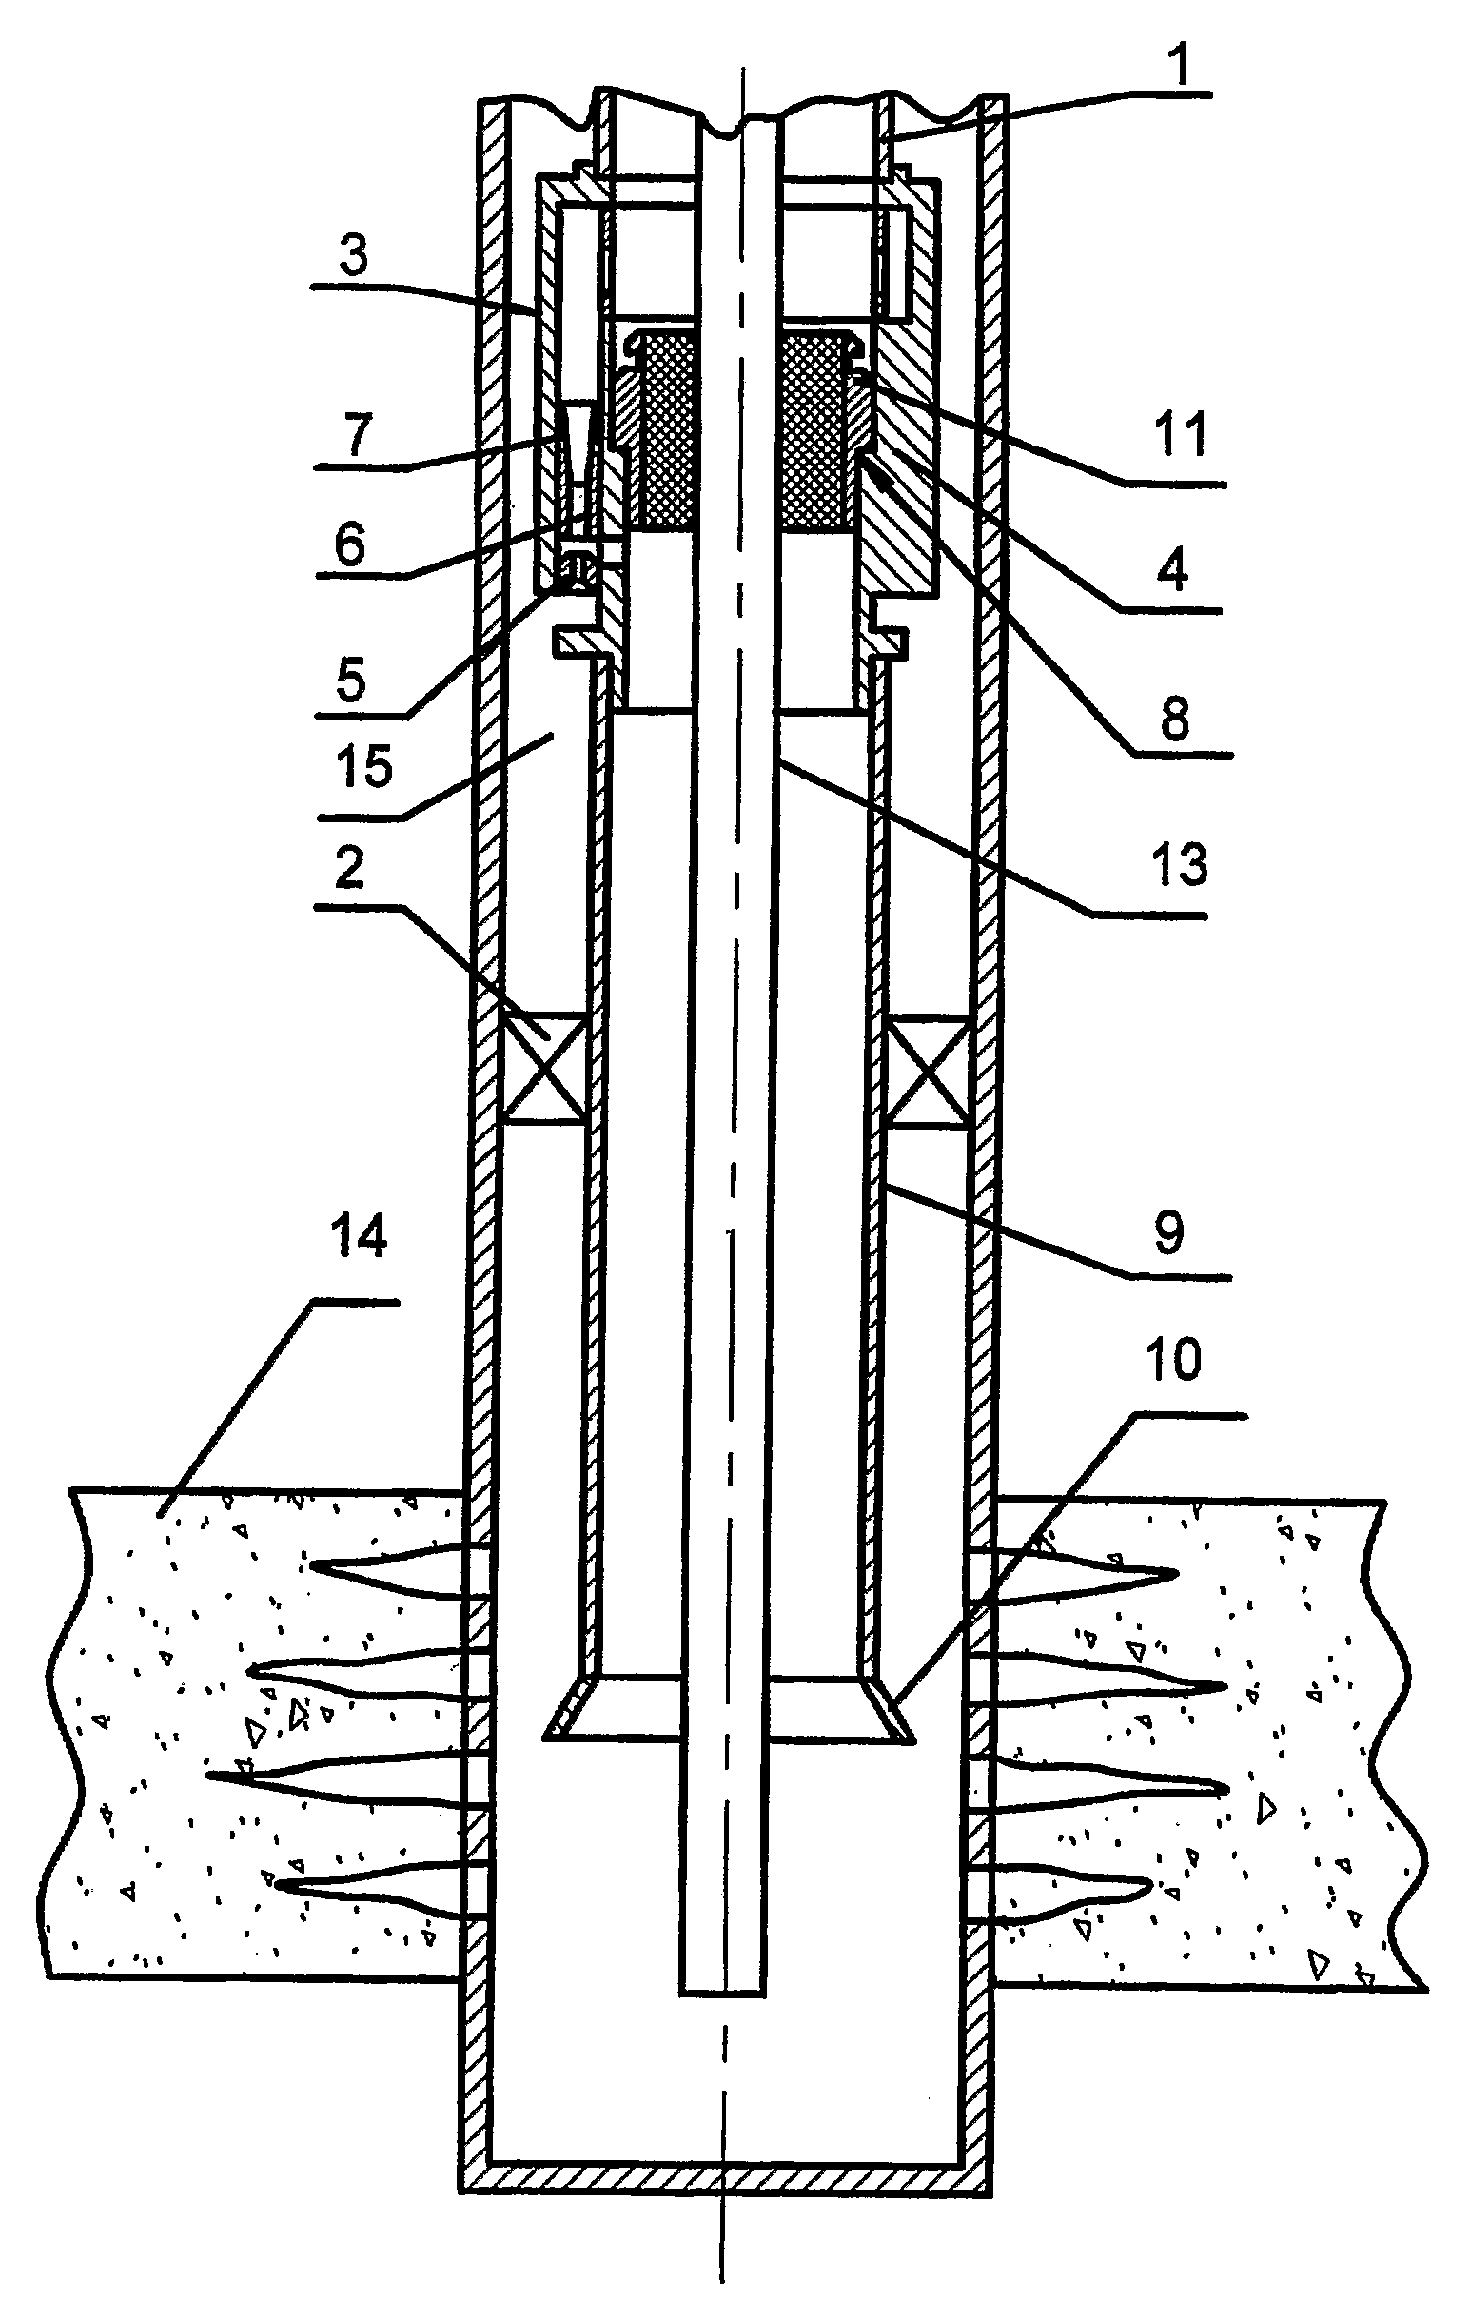 Method for operating a well jet device in the conditions of a formation hydraulic fracturing